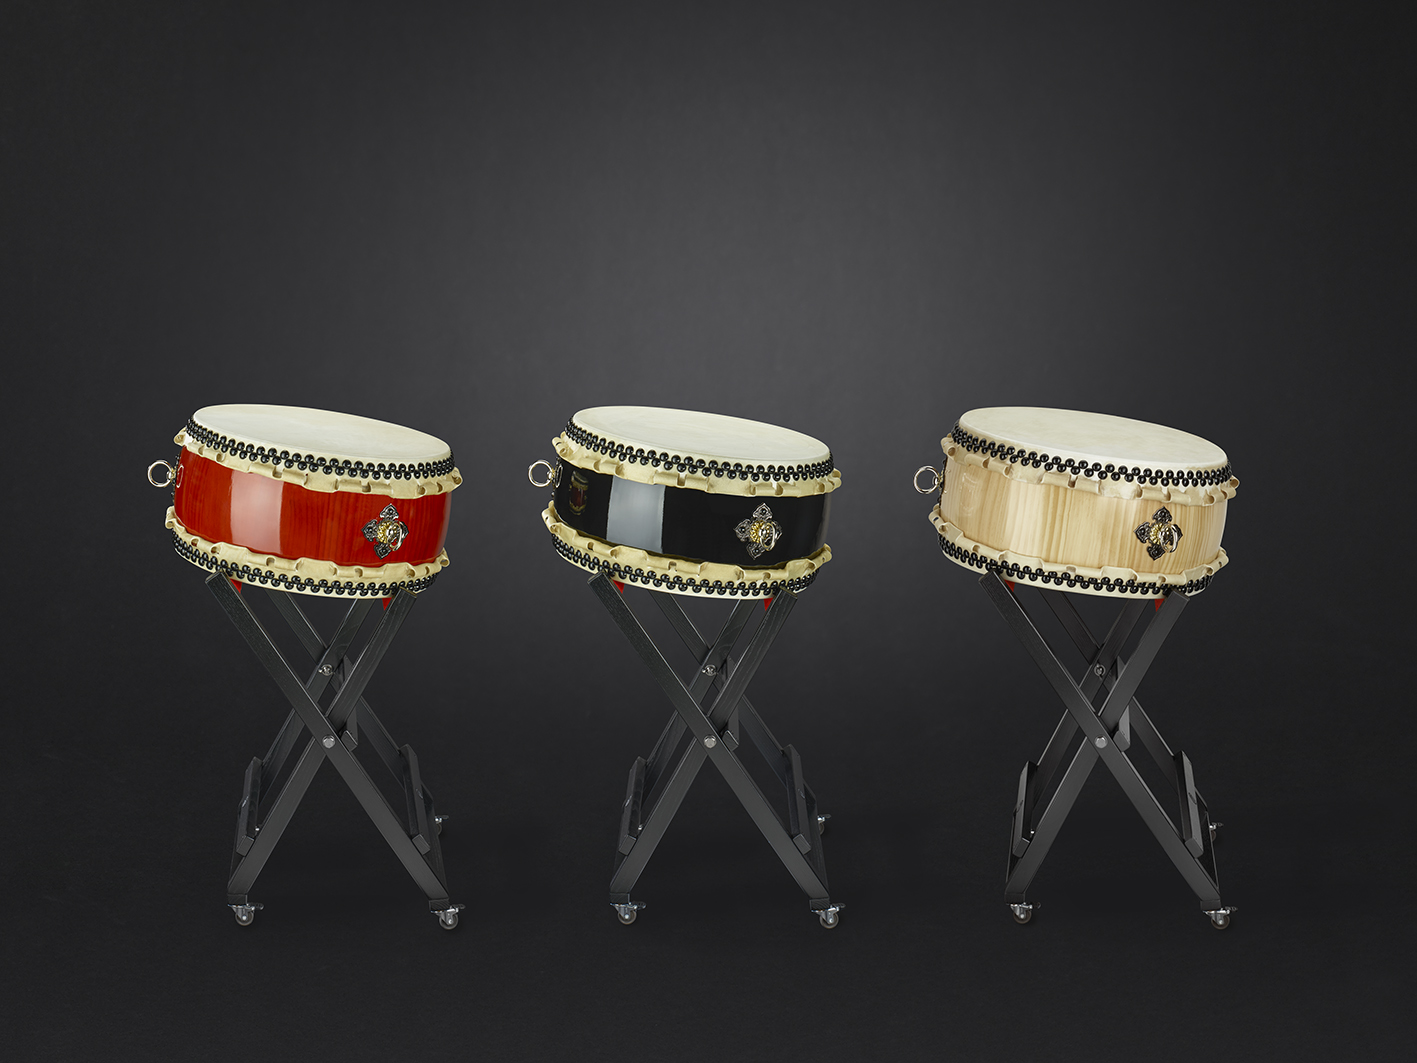 Hira-Daiko drums Ø48cm/h:25cm with with X-stand high  (695€ / 195€)